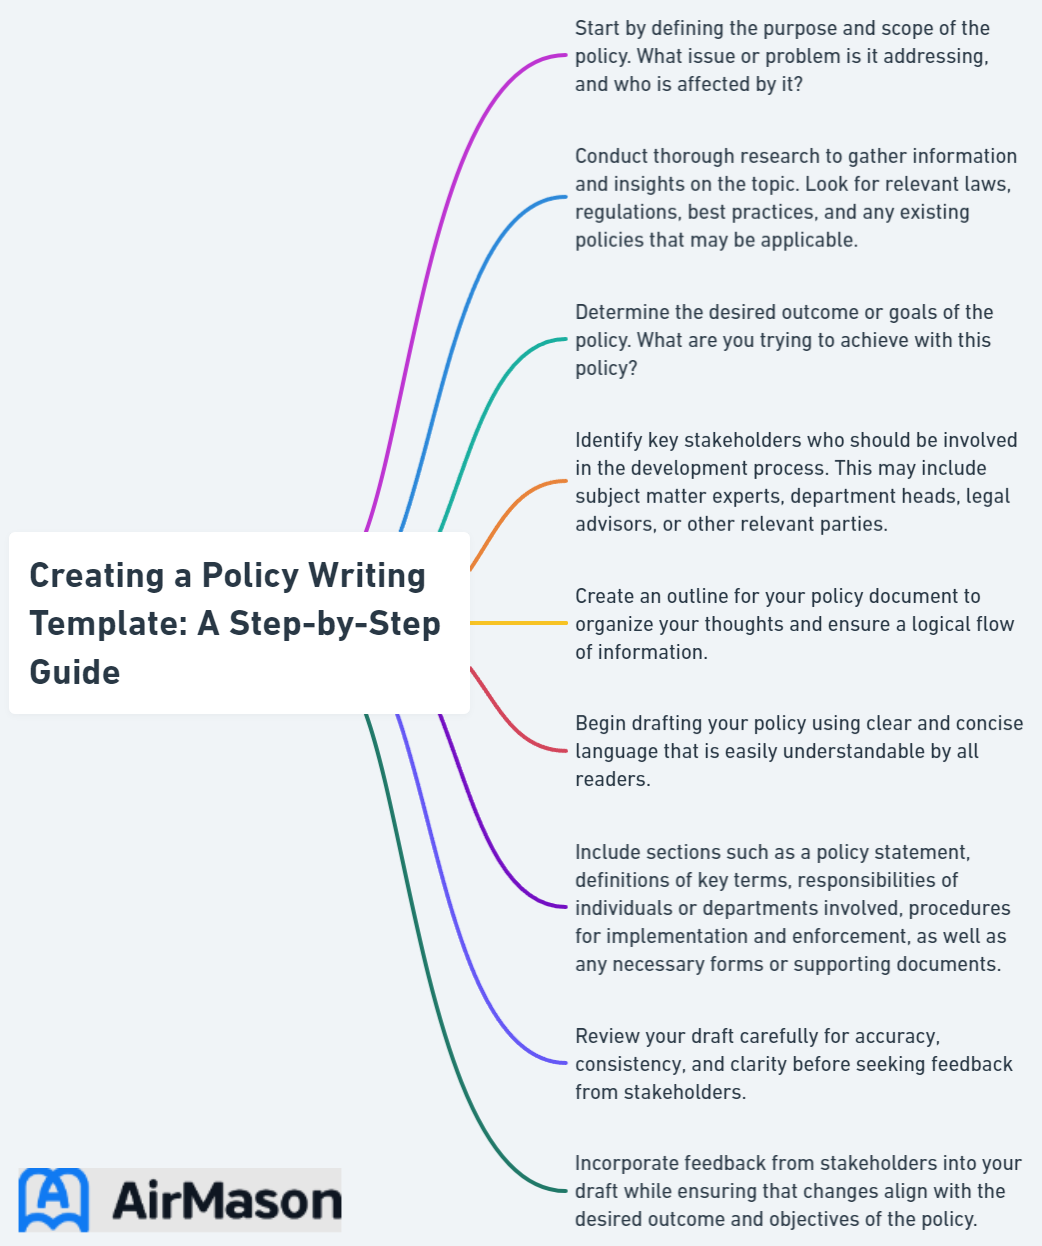 Creating a Policy Writing Template: A Step-by-Step Guide